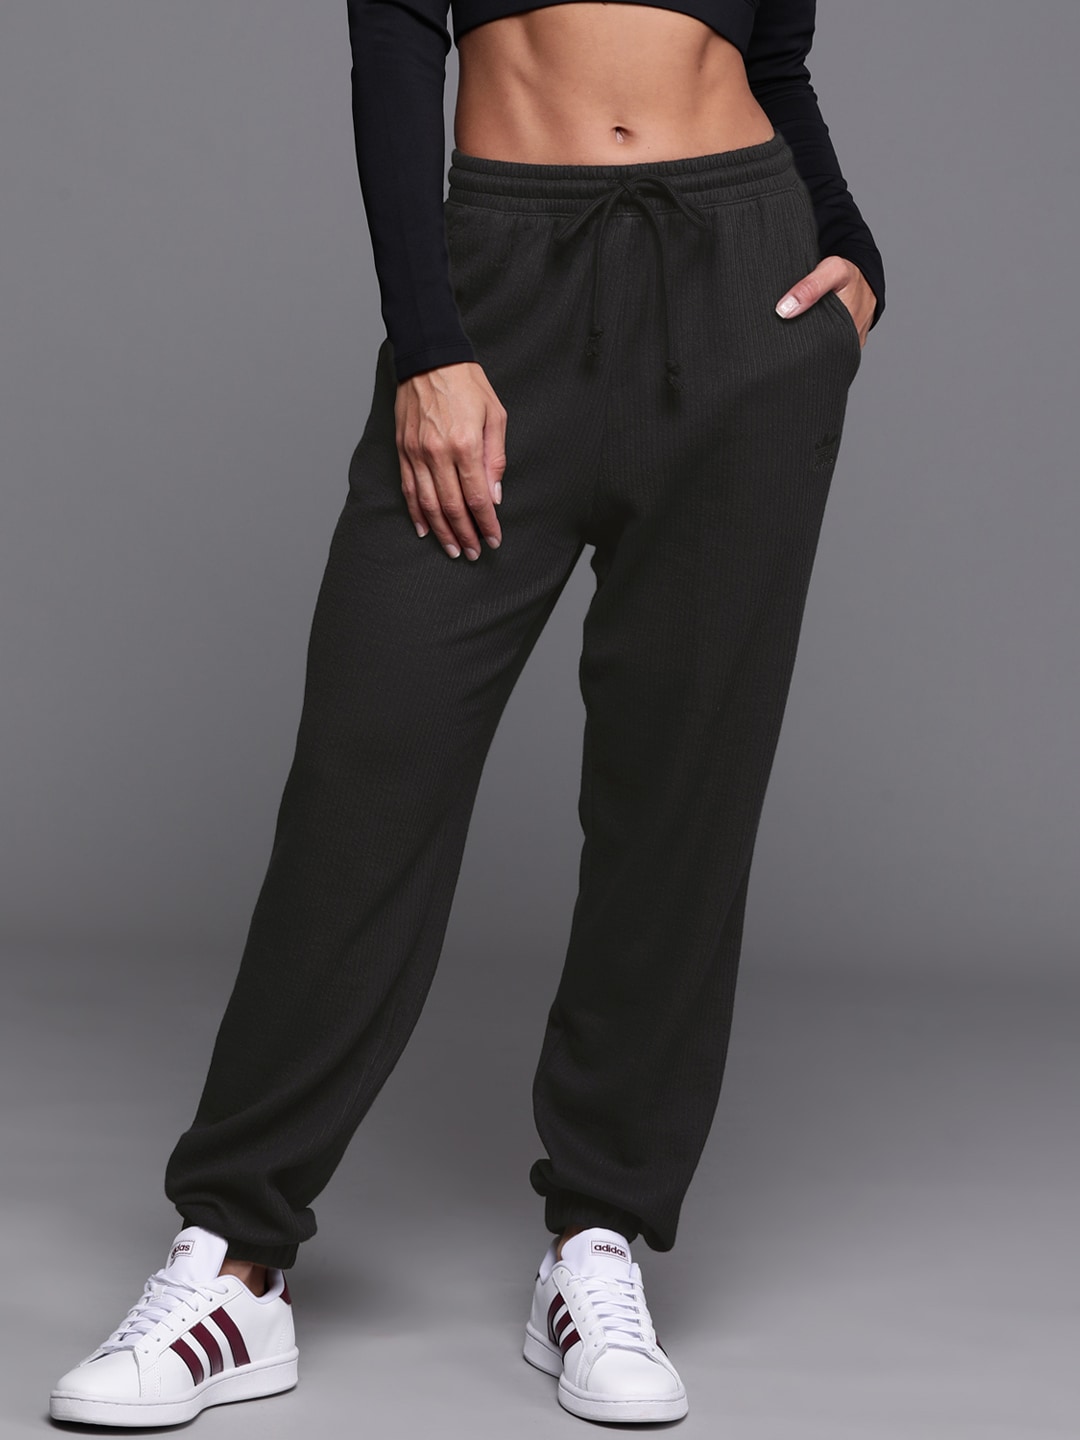 ADIDAS Originals Women Black Ribbed Cuffed Solid Sustainable Joggers Price in India